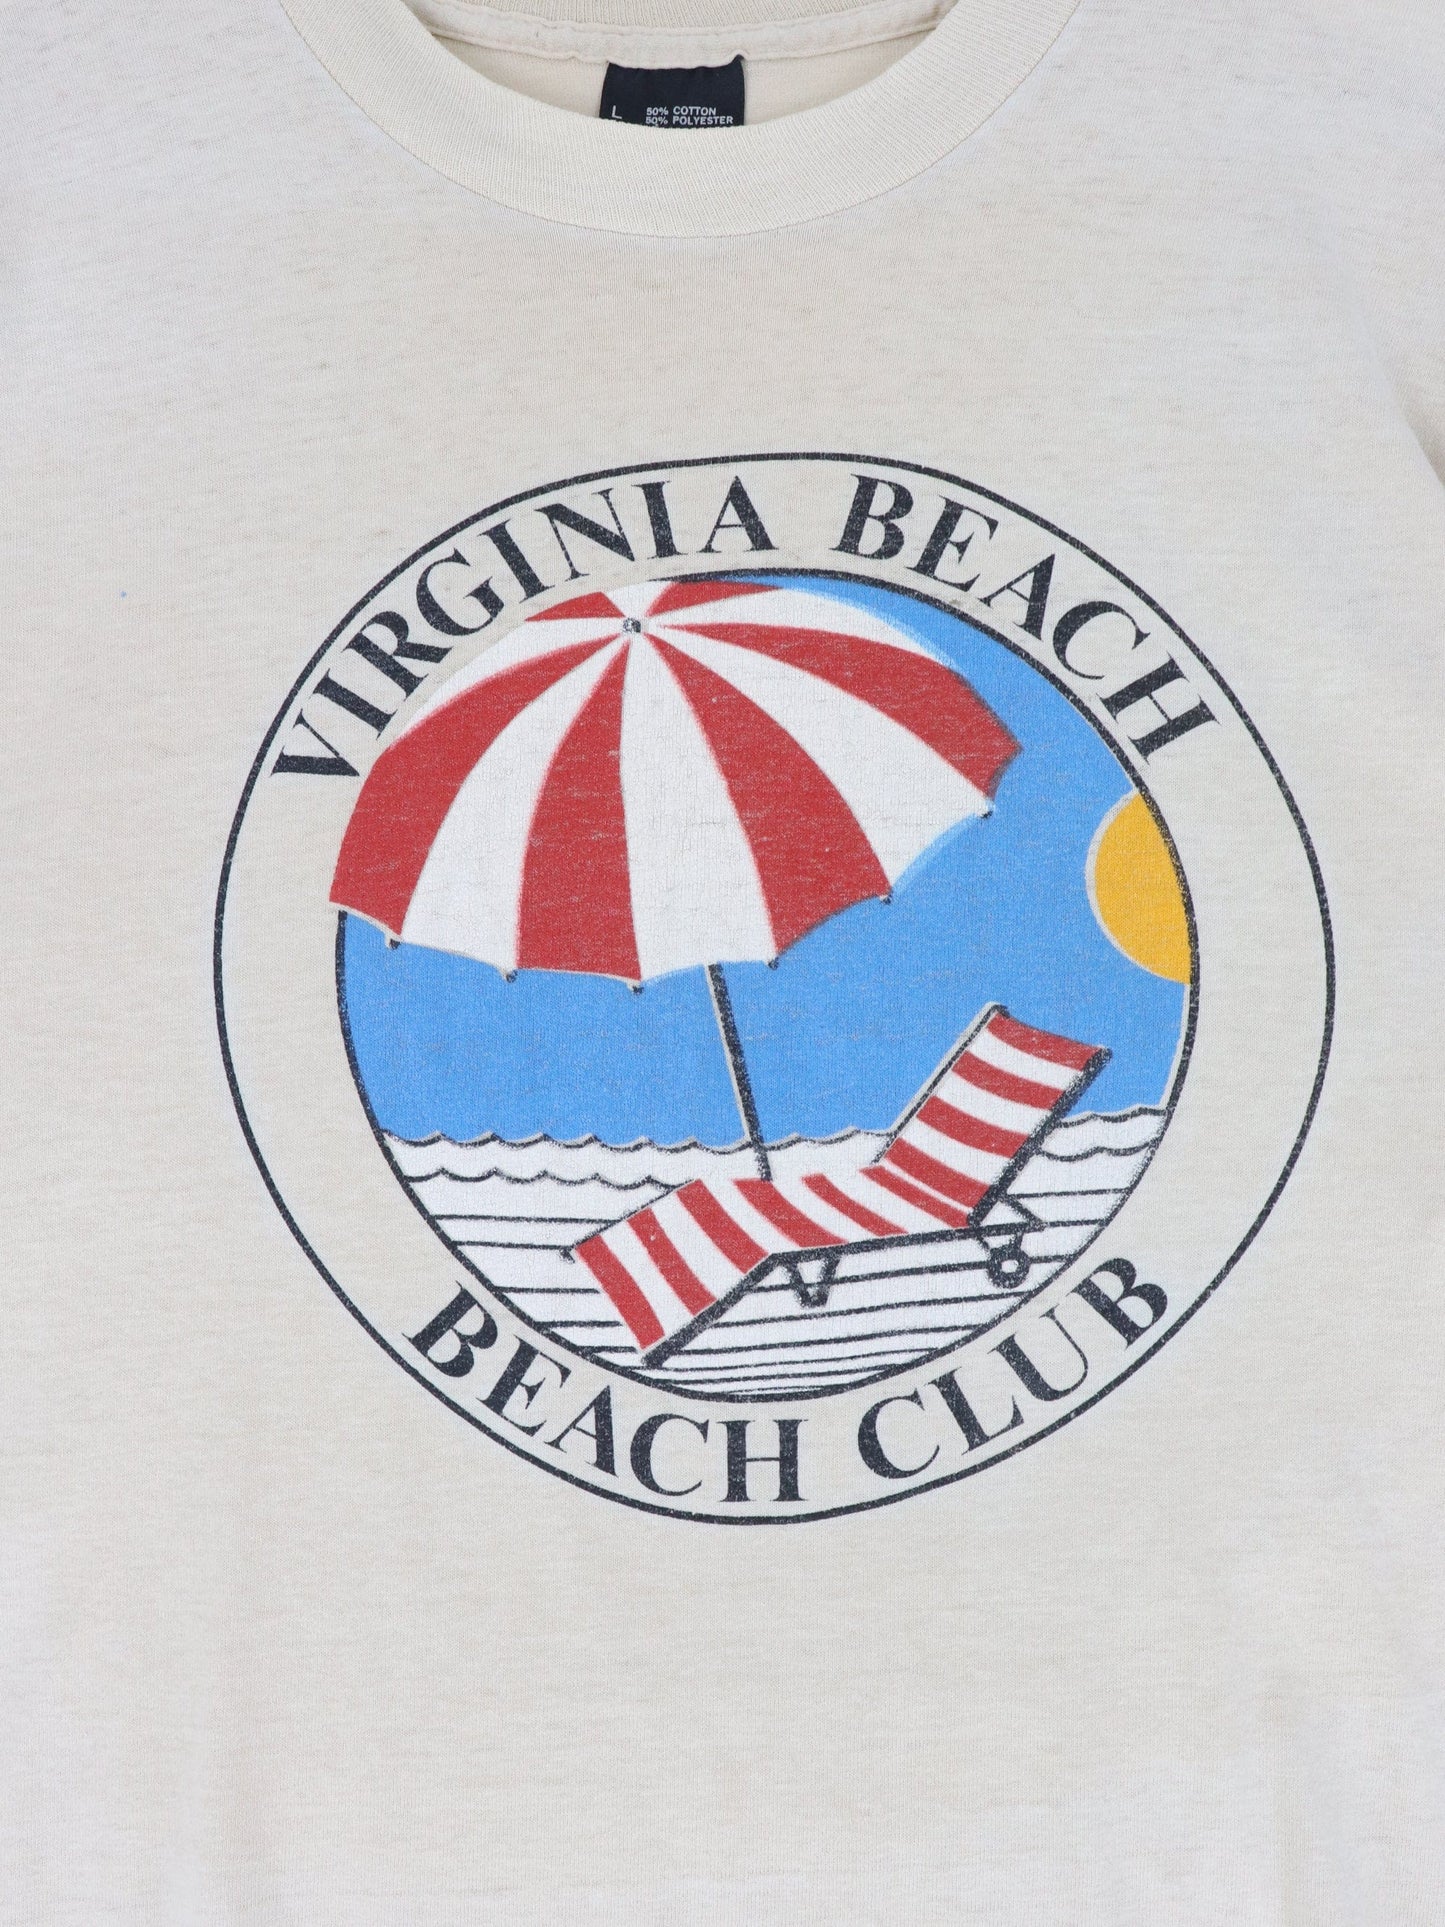 Other T Shirts & Tank Tops Vintage Virginia Beach Club T Shirt Mens Large Brown 90s Surfing